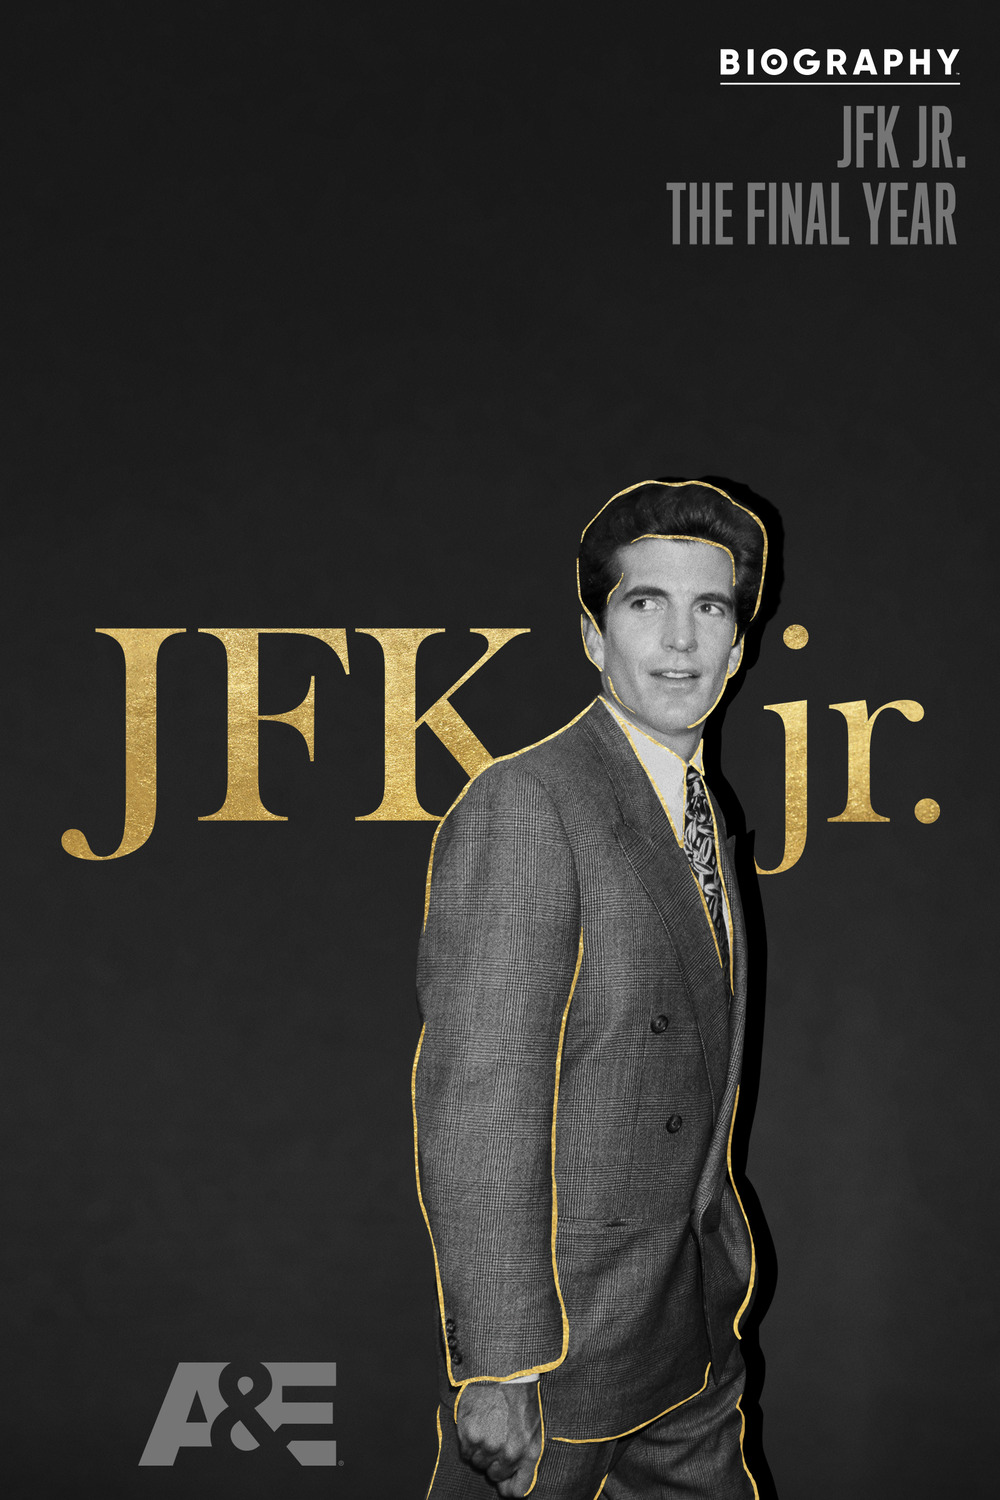 Extra Large TV Poster Image for Biography: JFK Jr. The Final Year 